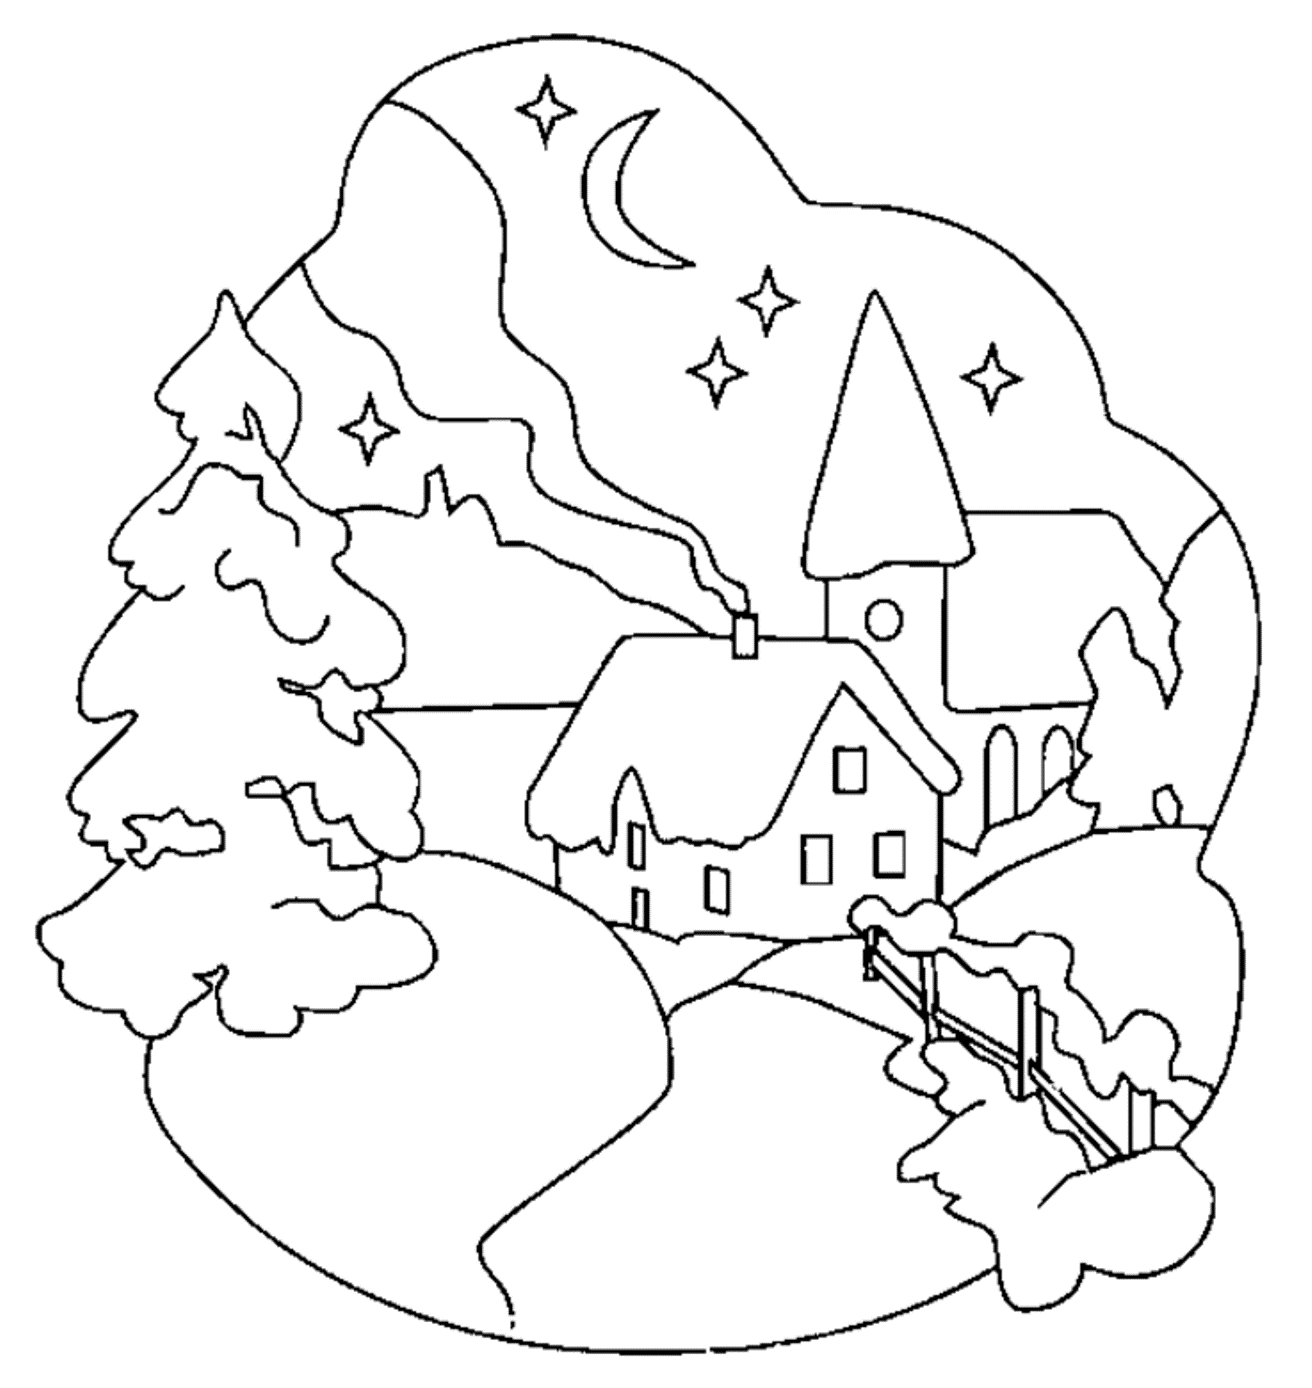 printable-winter-landscape-coloring-pages-click-to-print-or-download